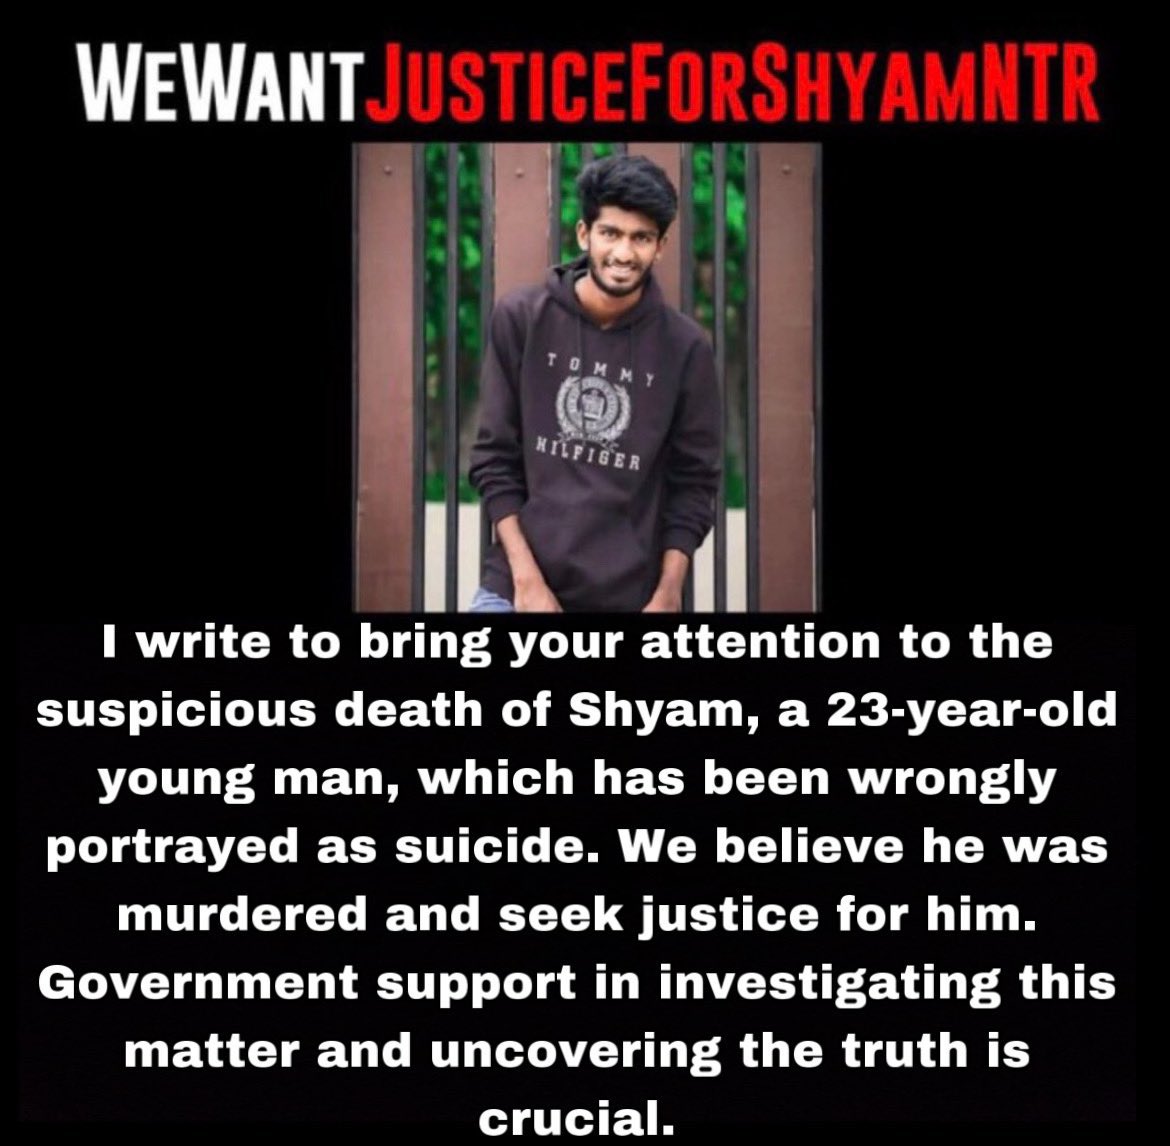 Deepest Condolences To His Family and  Friends
#WeWantJusticeForShyamNTR